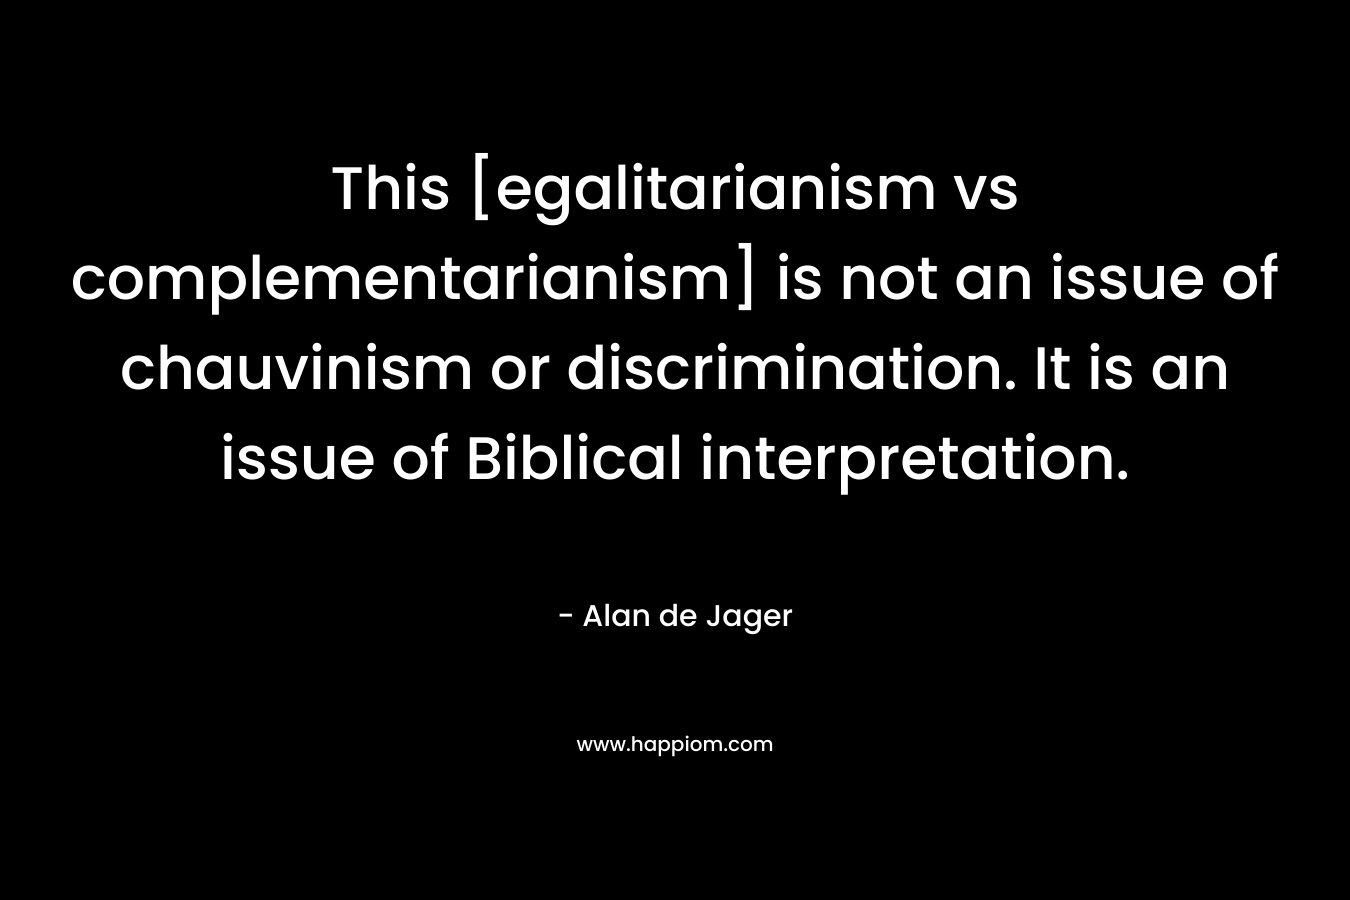 This [egalitarianism vs complementarianism] is not an issue of chauvinism or discrimination. It is an issue of Biblical interpretation. – Alan de Jager